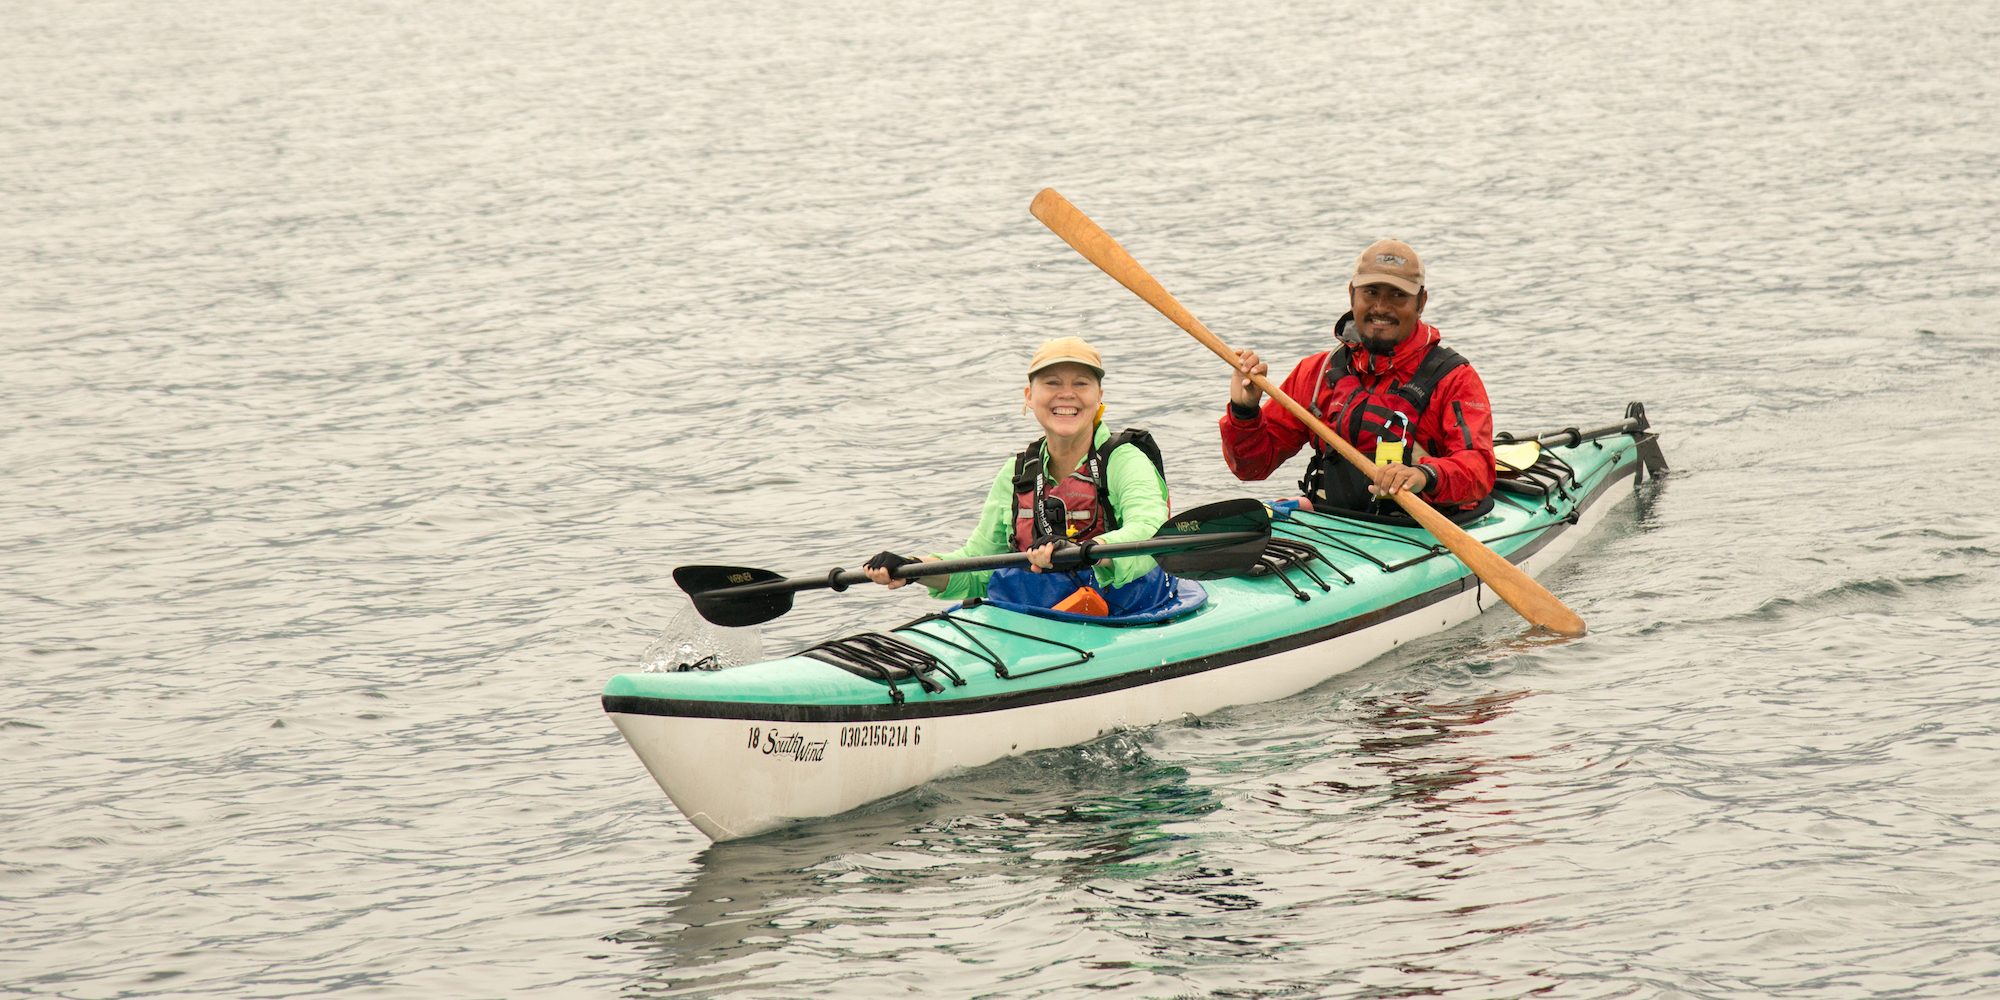 Two people in a tandem kayak smiling while holding different paddles, one wooden and one plastic.